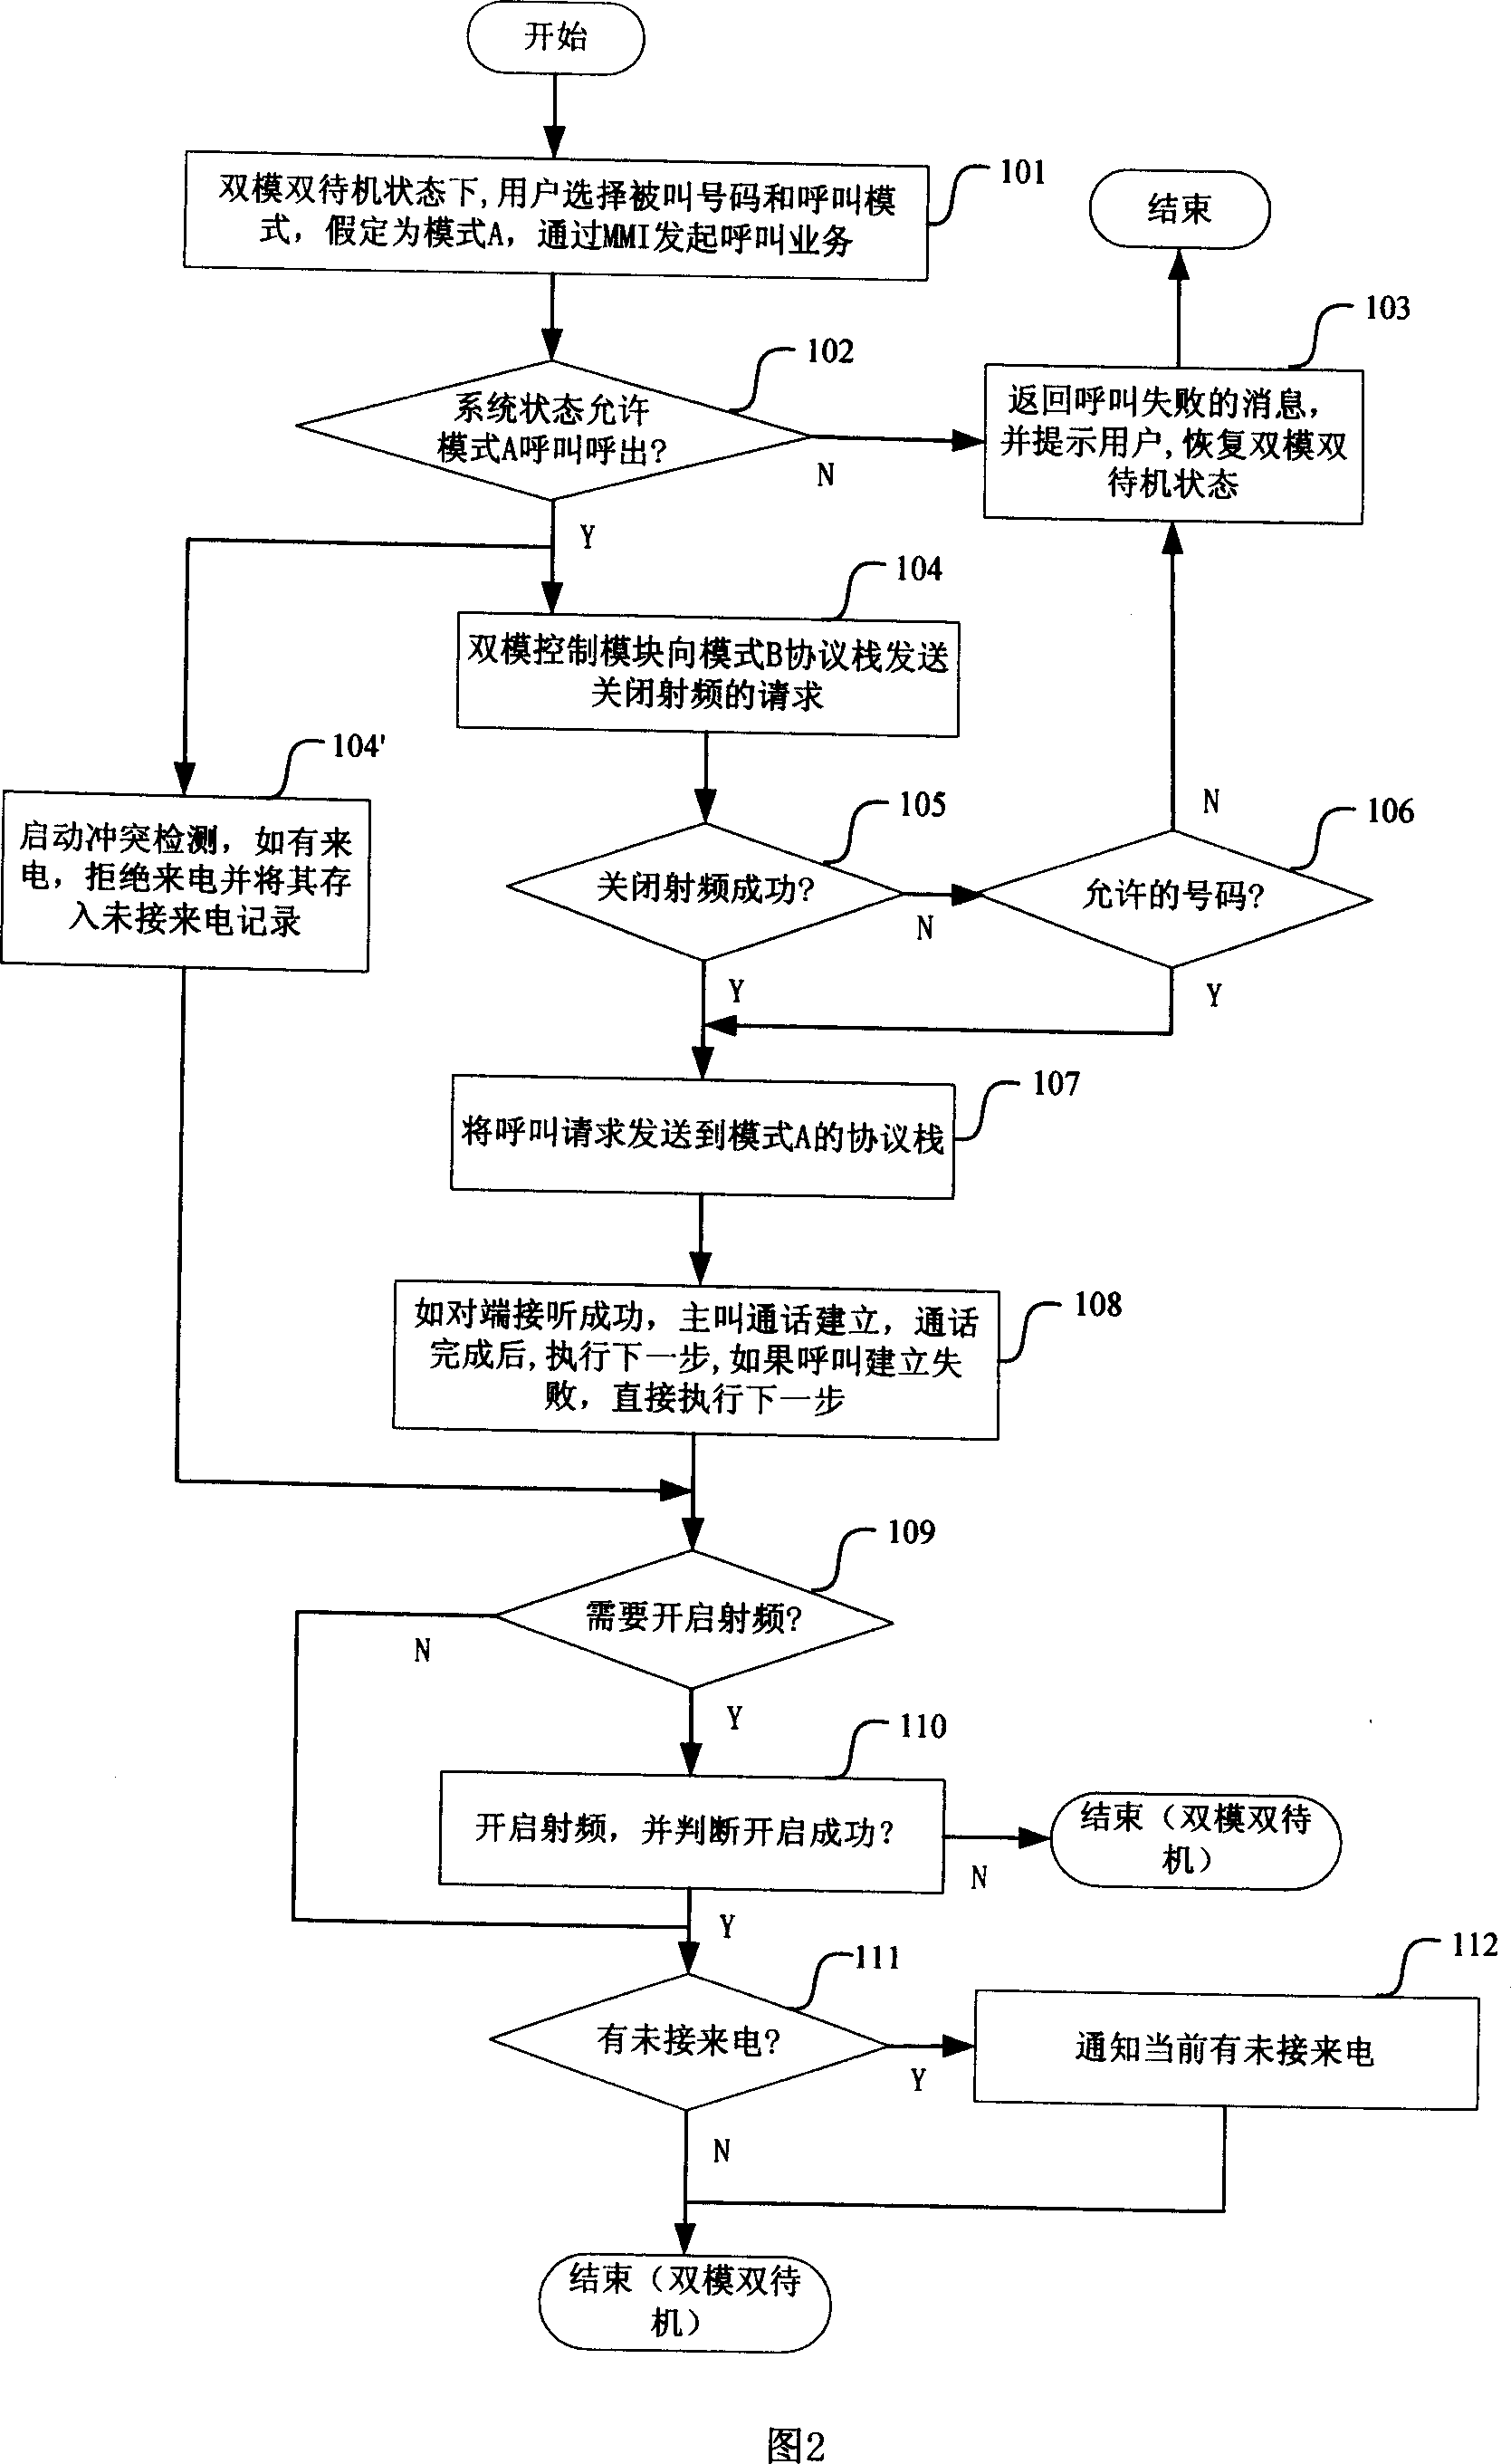 Method for implementing call in dual-mode mobile phone